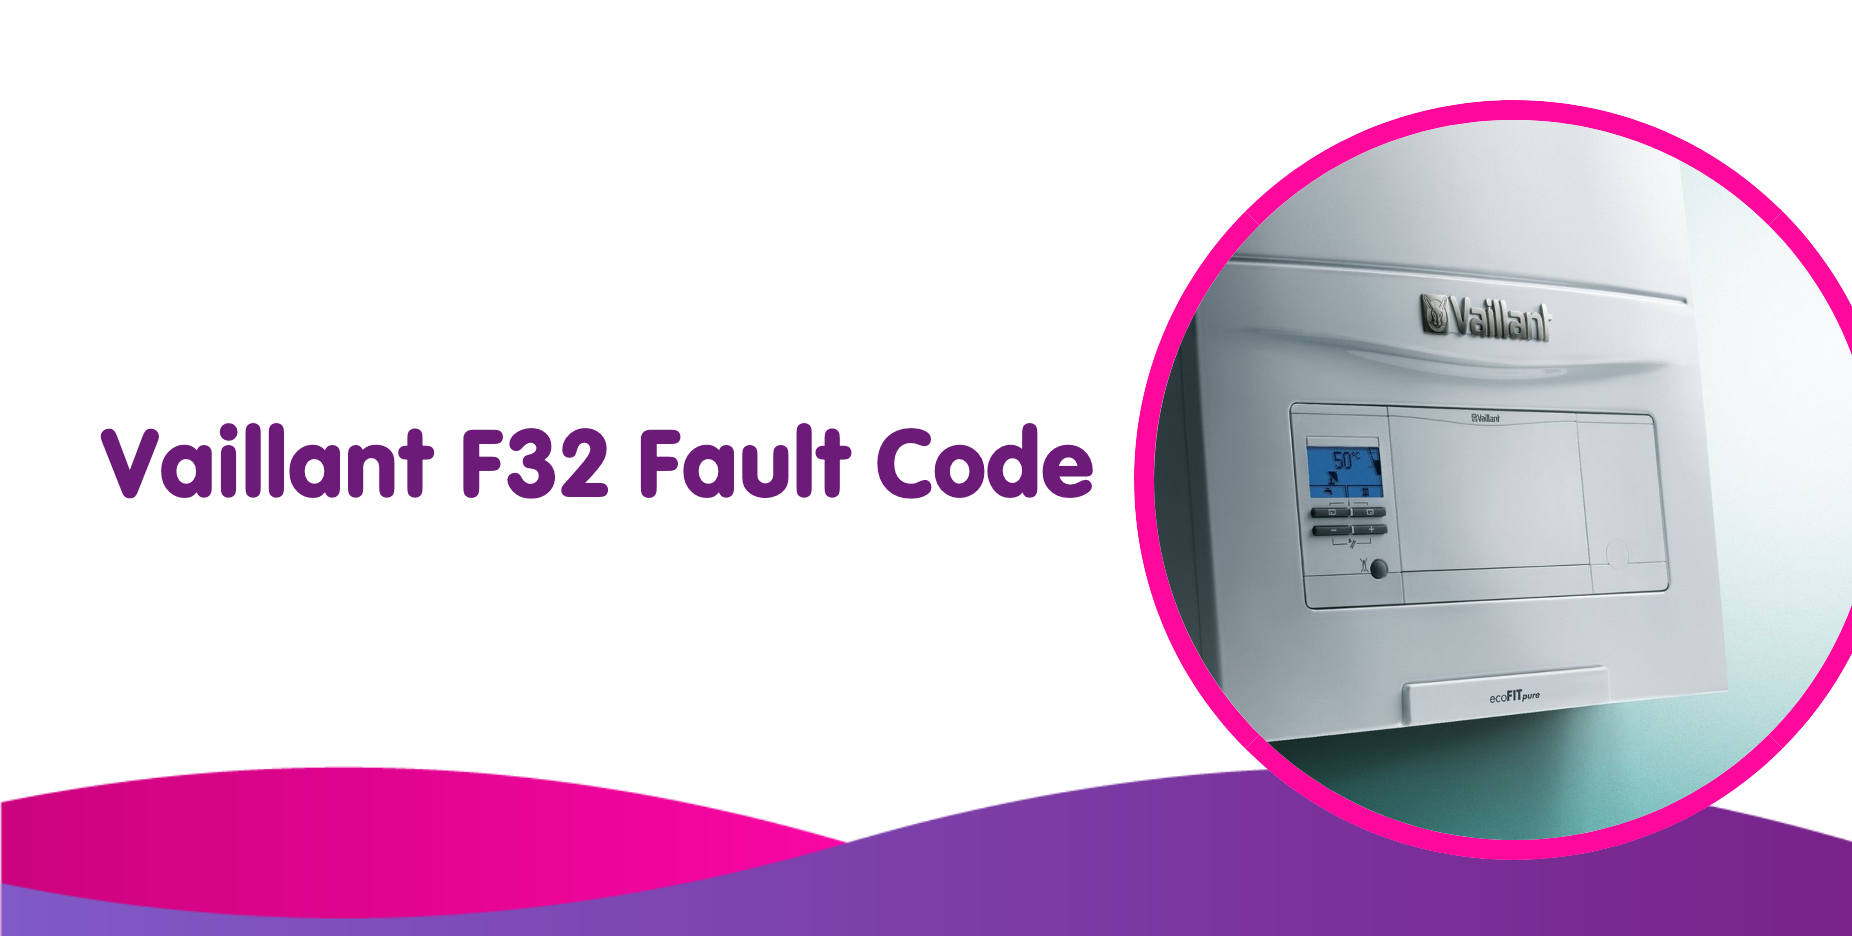 F32 Vaillant Fault Code Meaning, Causes & How To Fix